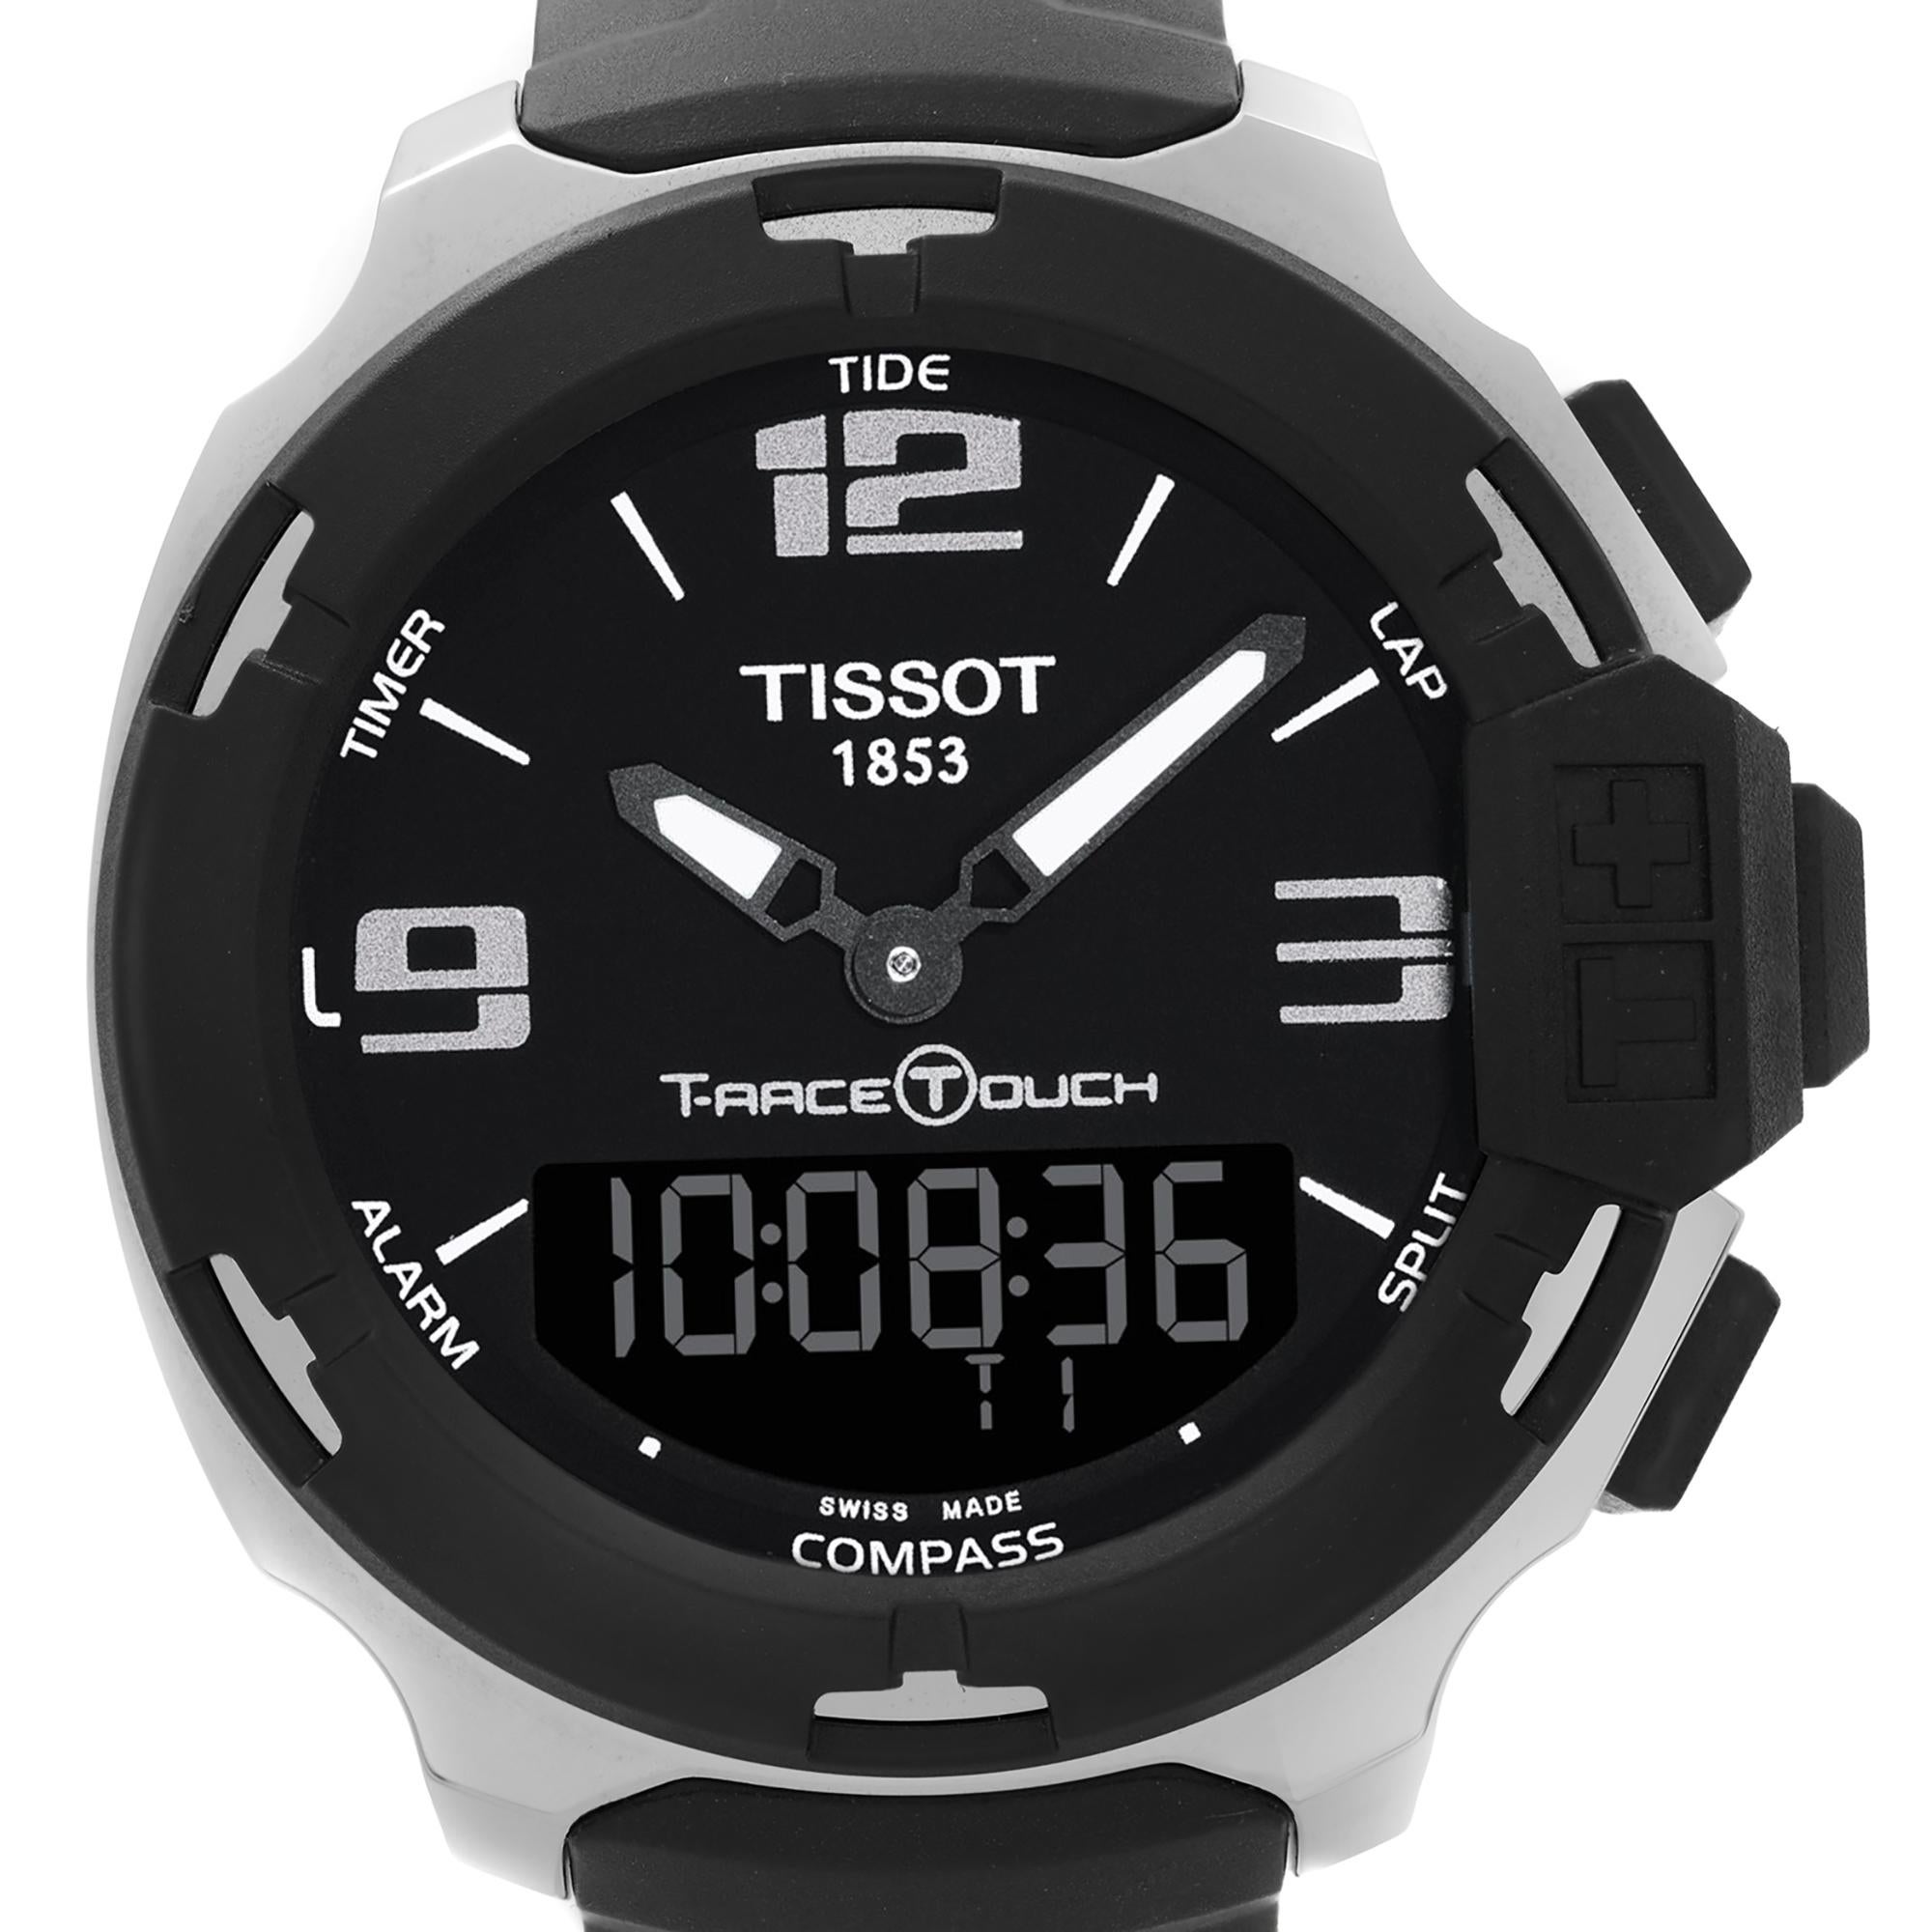 Display Model Tissot T-Race Touch Steel Rubber Black Dial Quartz Men's Watch T081.420.17.057.01. The Watch Has Minor Blemishes on the Bezel Due to Store Handling. This Beautiful Timepiece is Powered by Quartz (Battery) Movement and Features: Round